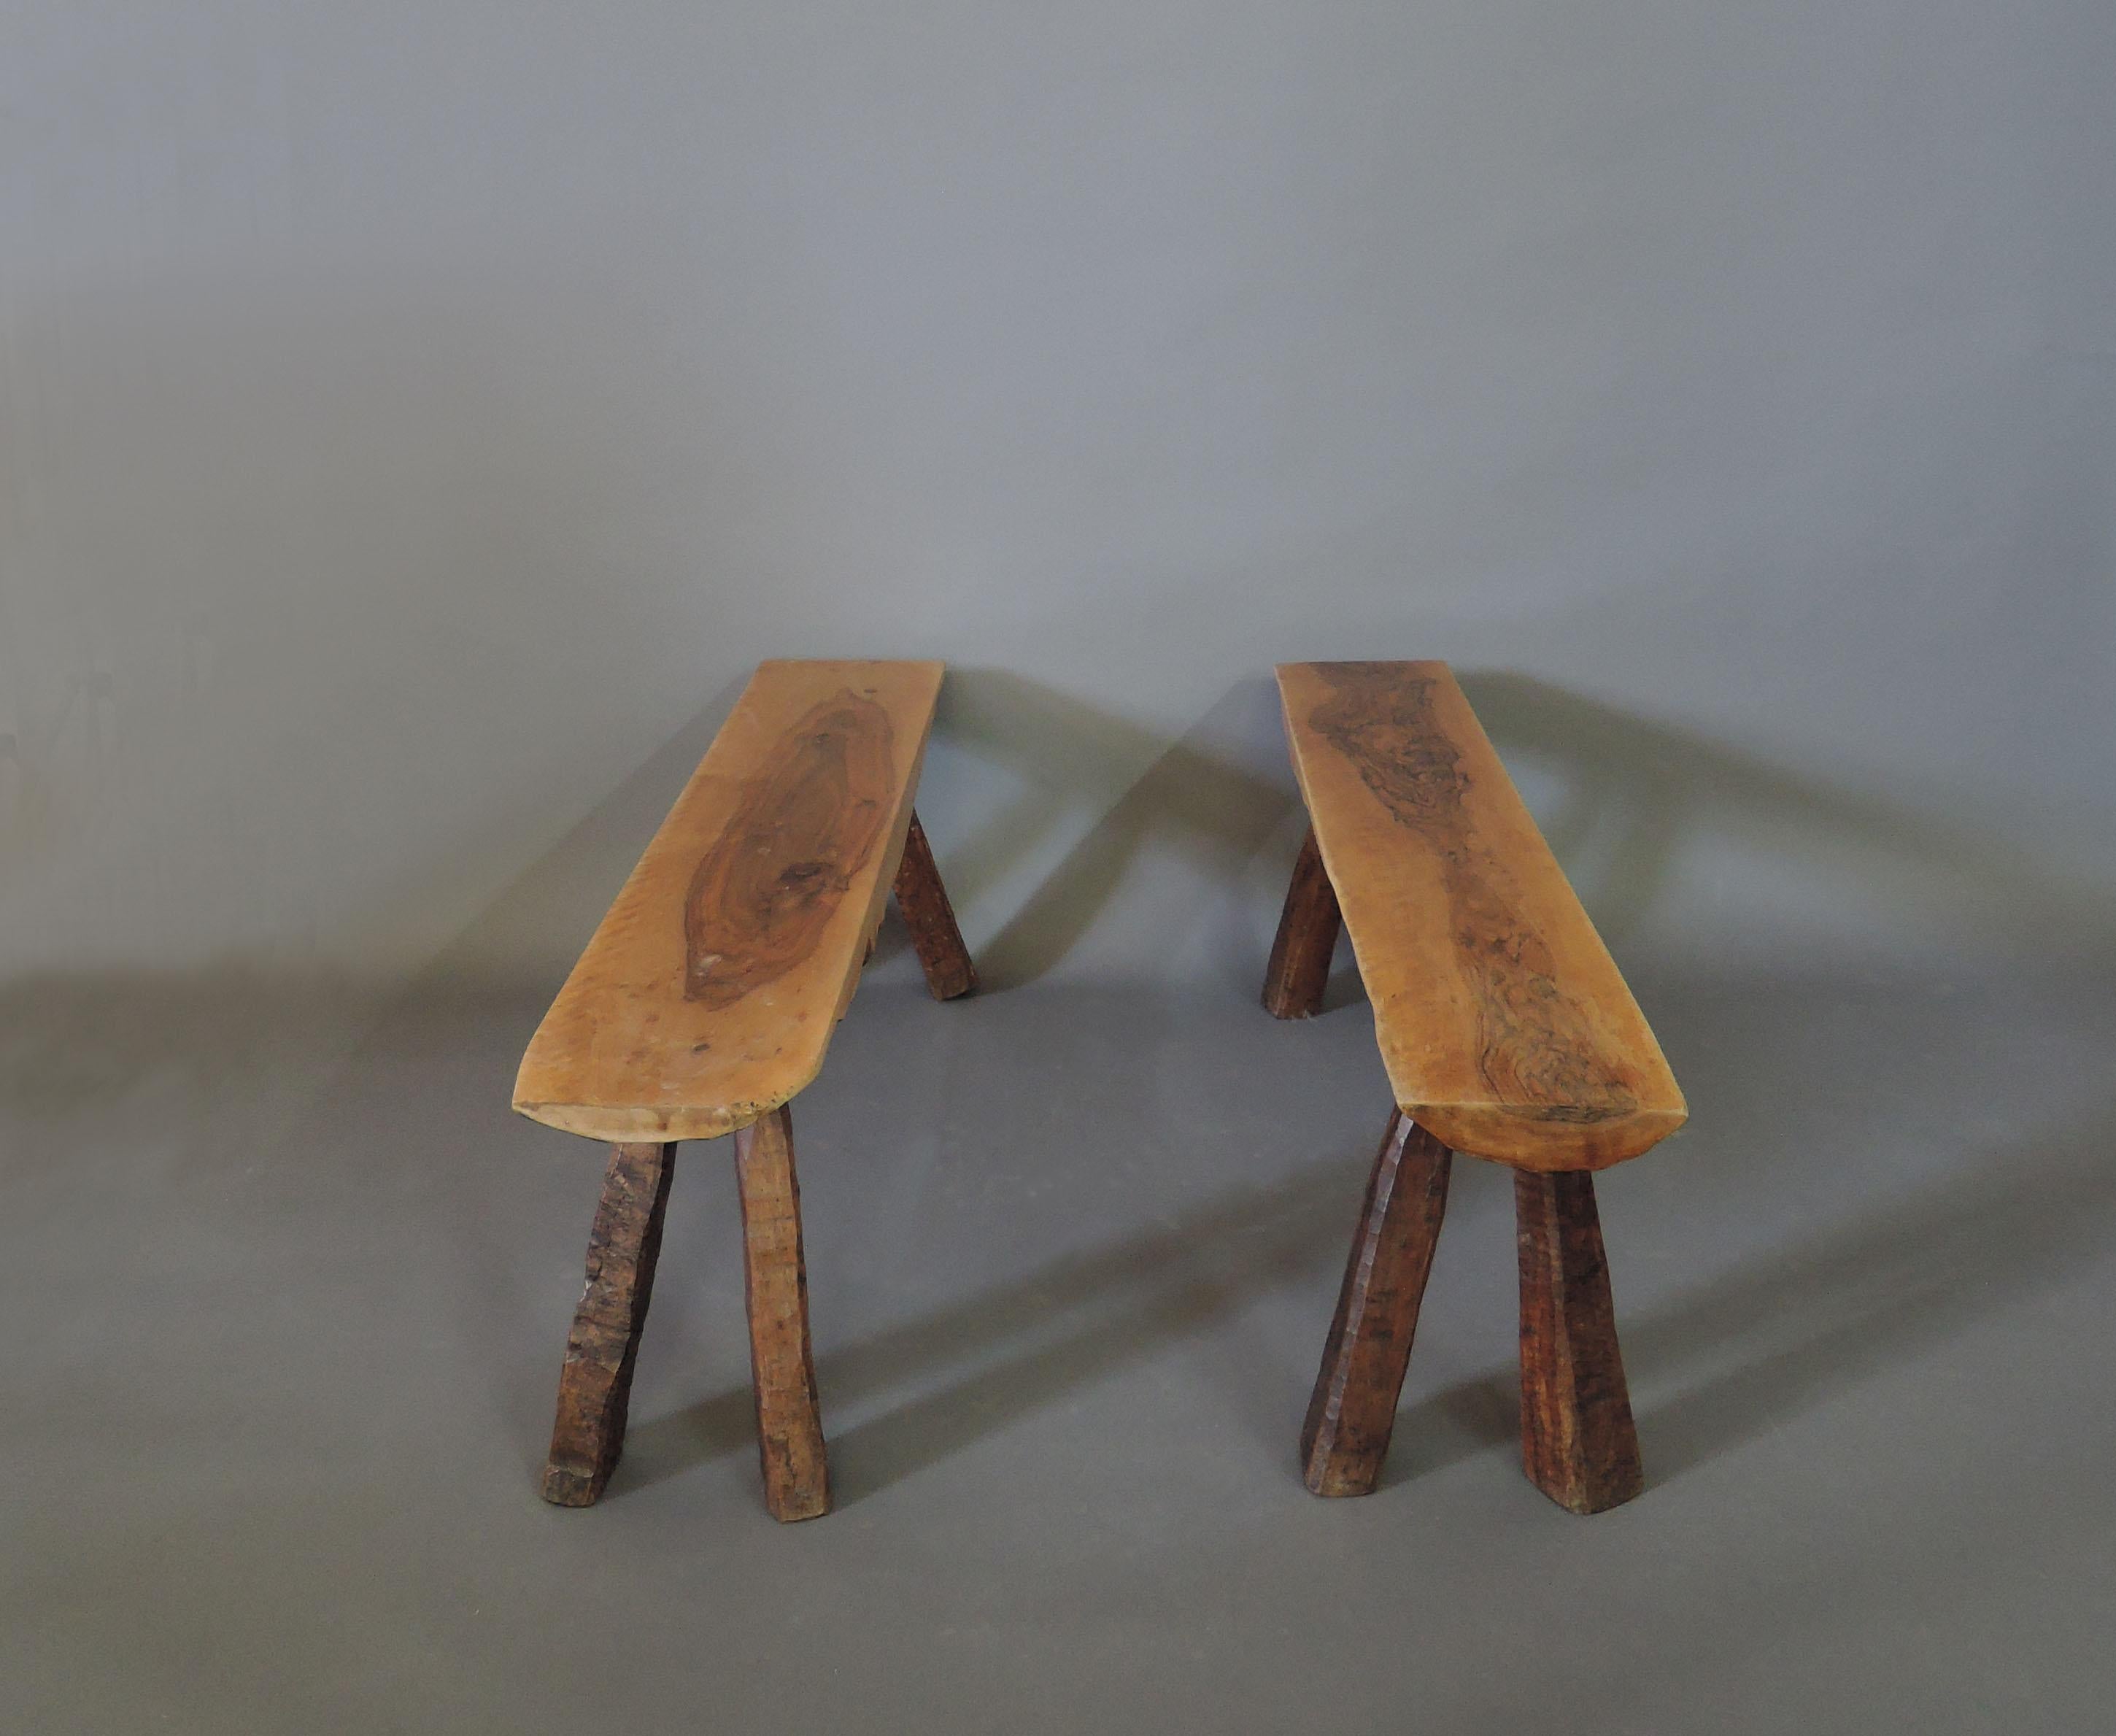 A pair of 1950s solid walnut benches.
Dimensions of the table are H 29